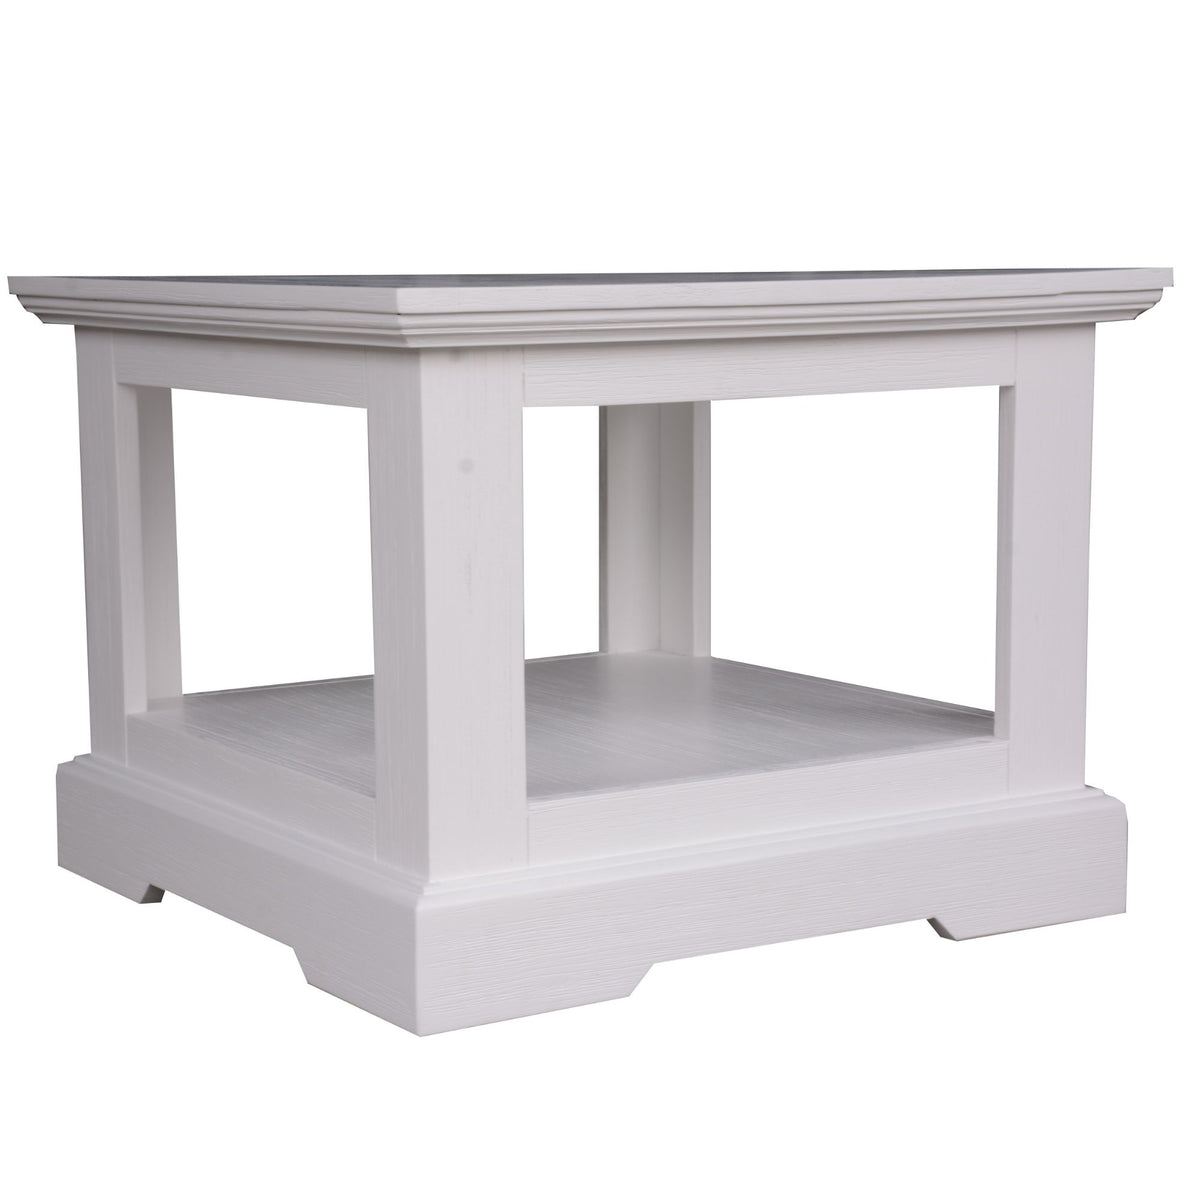 Laelia Side Table with Solid Acacia Timber in White - 60cm - Notbrand